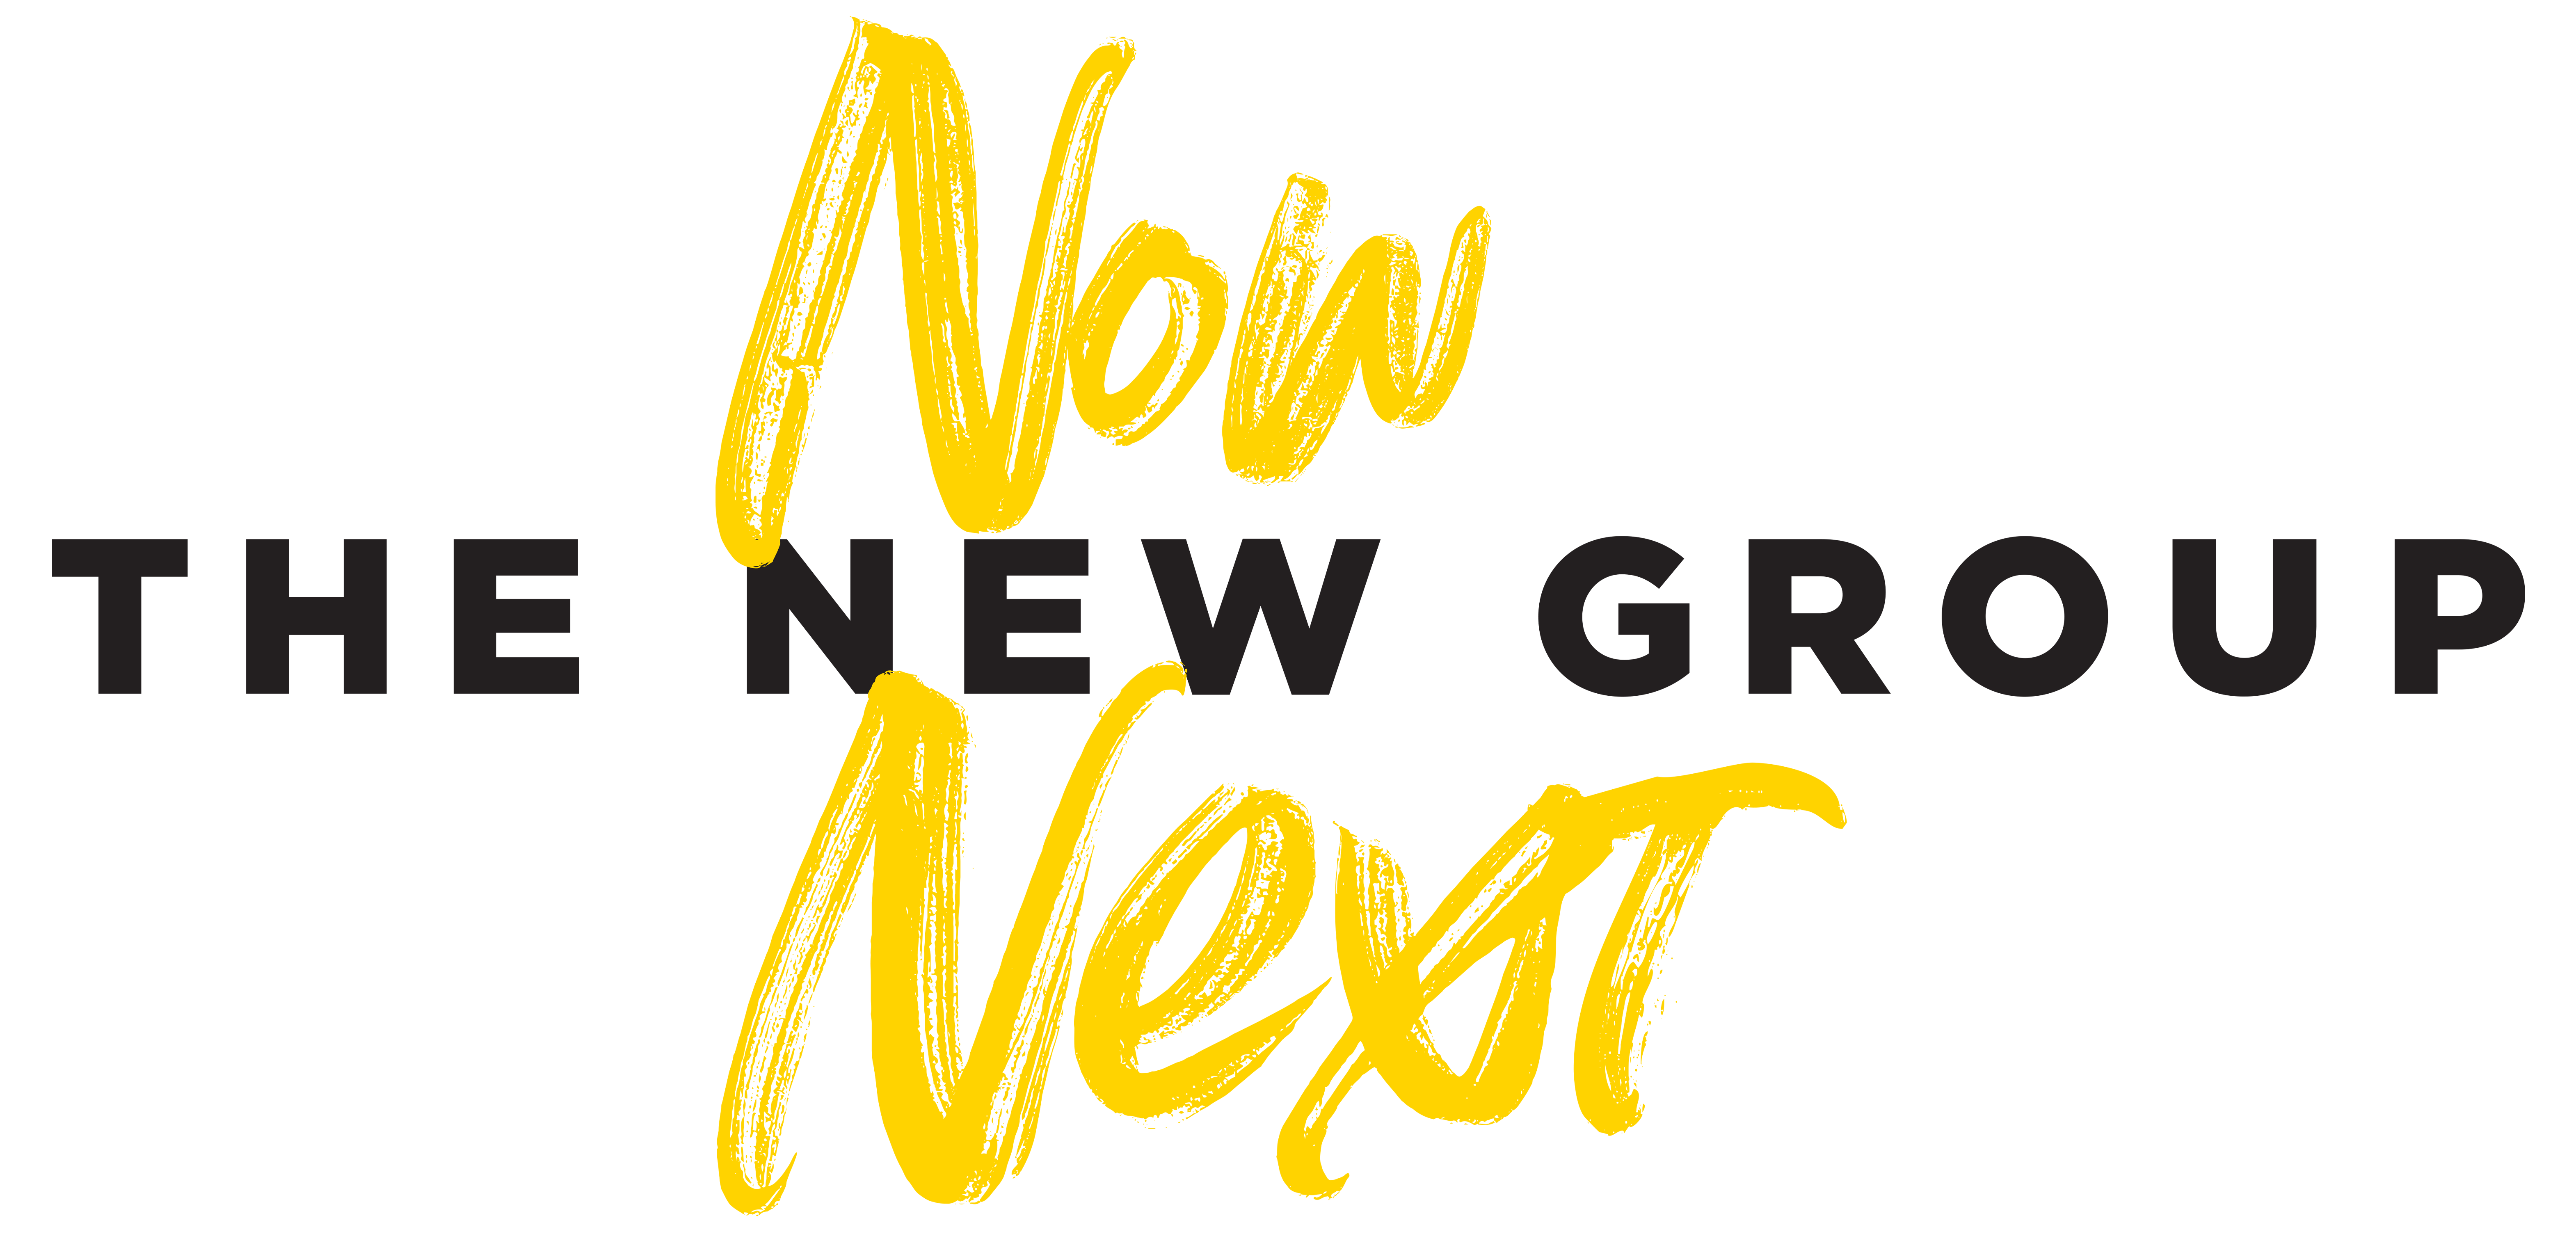 Logo for The New Group Now & Next Fundraising Campaign which includes the traditional New Group logo in black with the words "Now" and "Next" in a handwritten font above and below it.